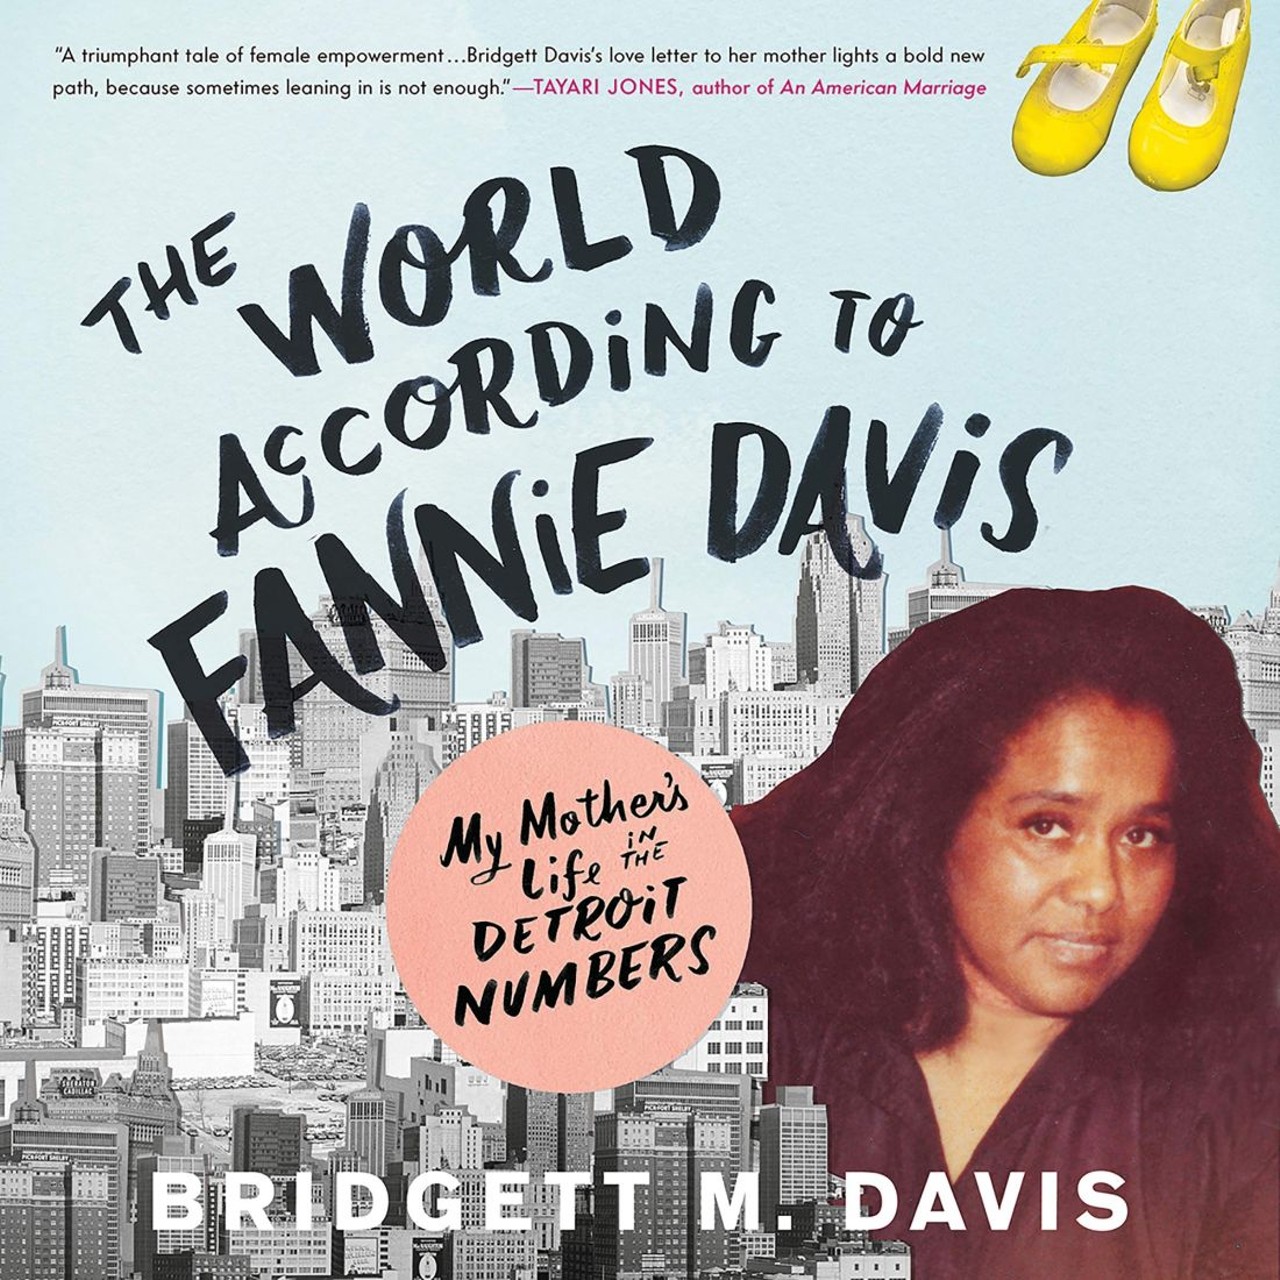 The World According to Fannie Davis: My Mother&#146;s Life in the Detroit Numbers
This memoir tells the story of one mother-daughter pair and their life in the Detroit numbers rackets. The mother, a numbers runner named Fannie, is the center of the work, written by her actual daughter, the novelist and professor Bridgett M. Davis, making the piece a beautiful homage to a mother who gave all she could to others. The novel follows Fannie, the granddaughter of slaves, as she guides her two husbands, five children, and a grandson through the city&#146;s decline with her love, courage, and unwavering spirit.